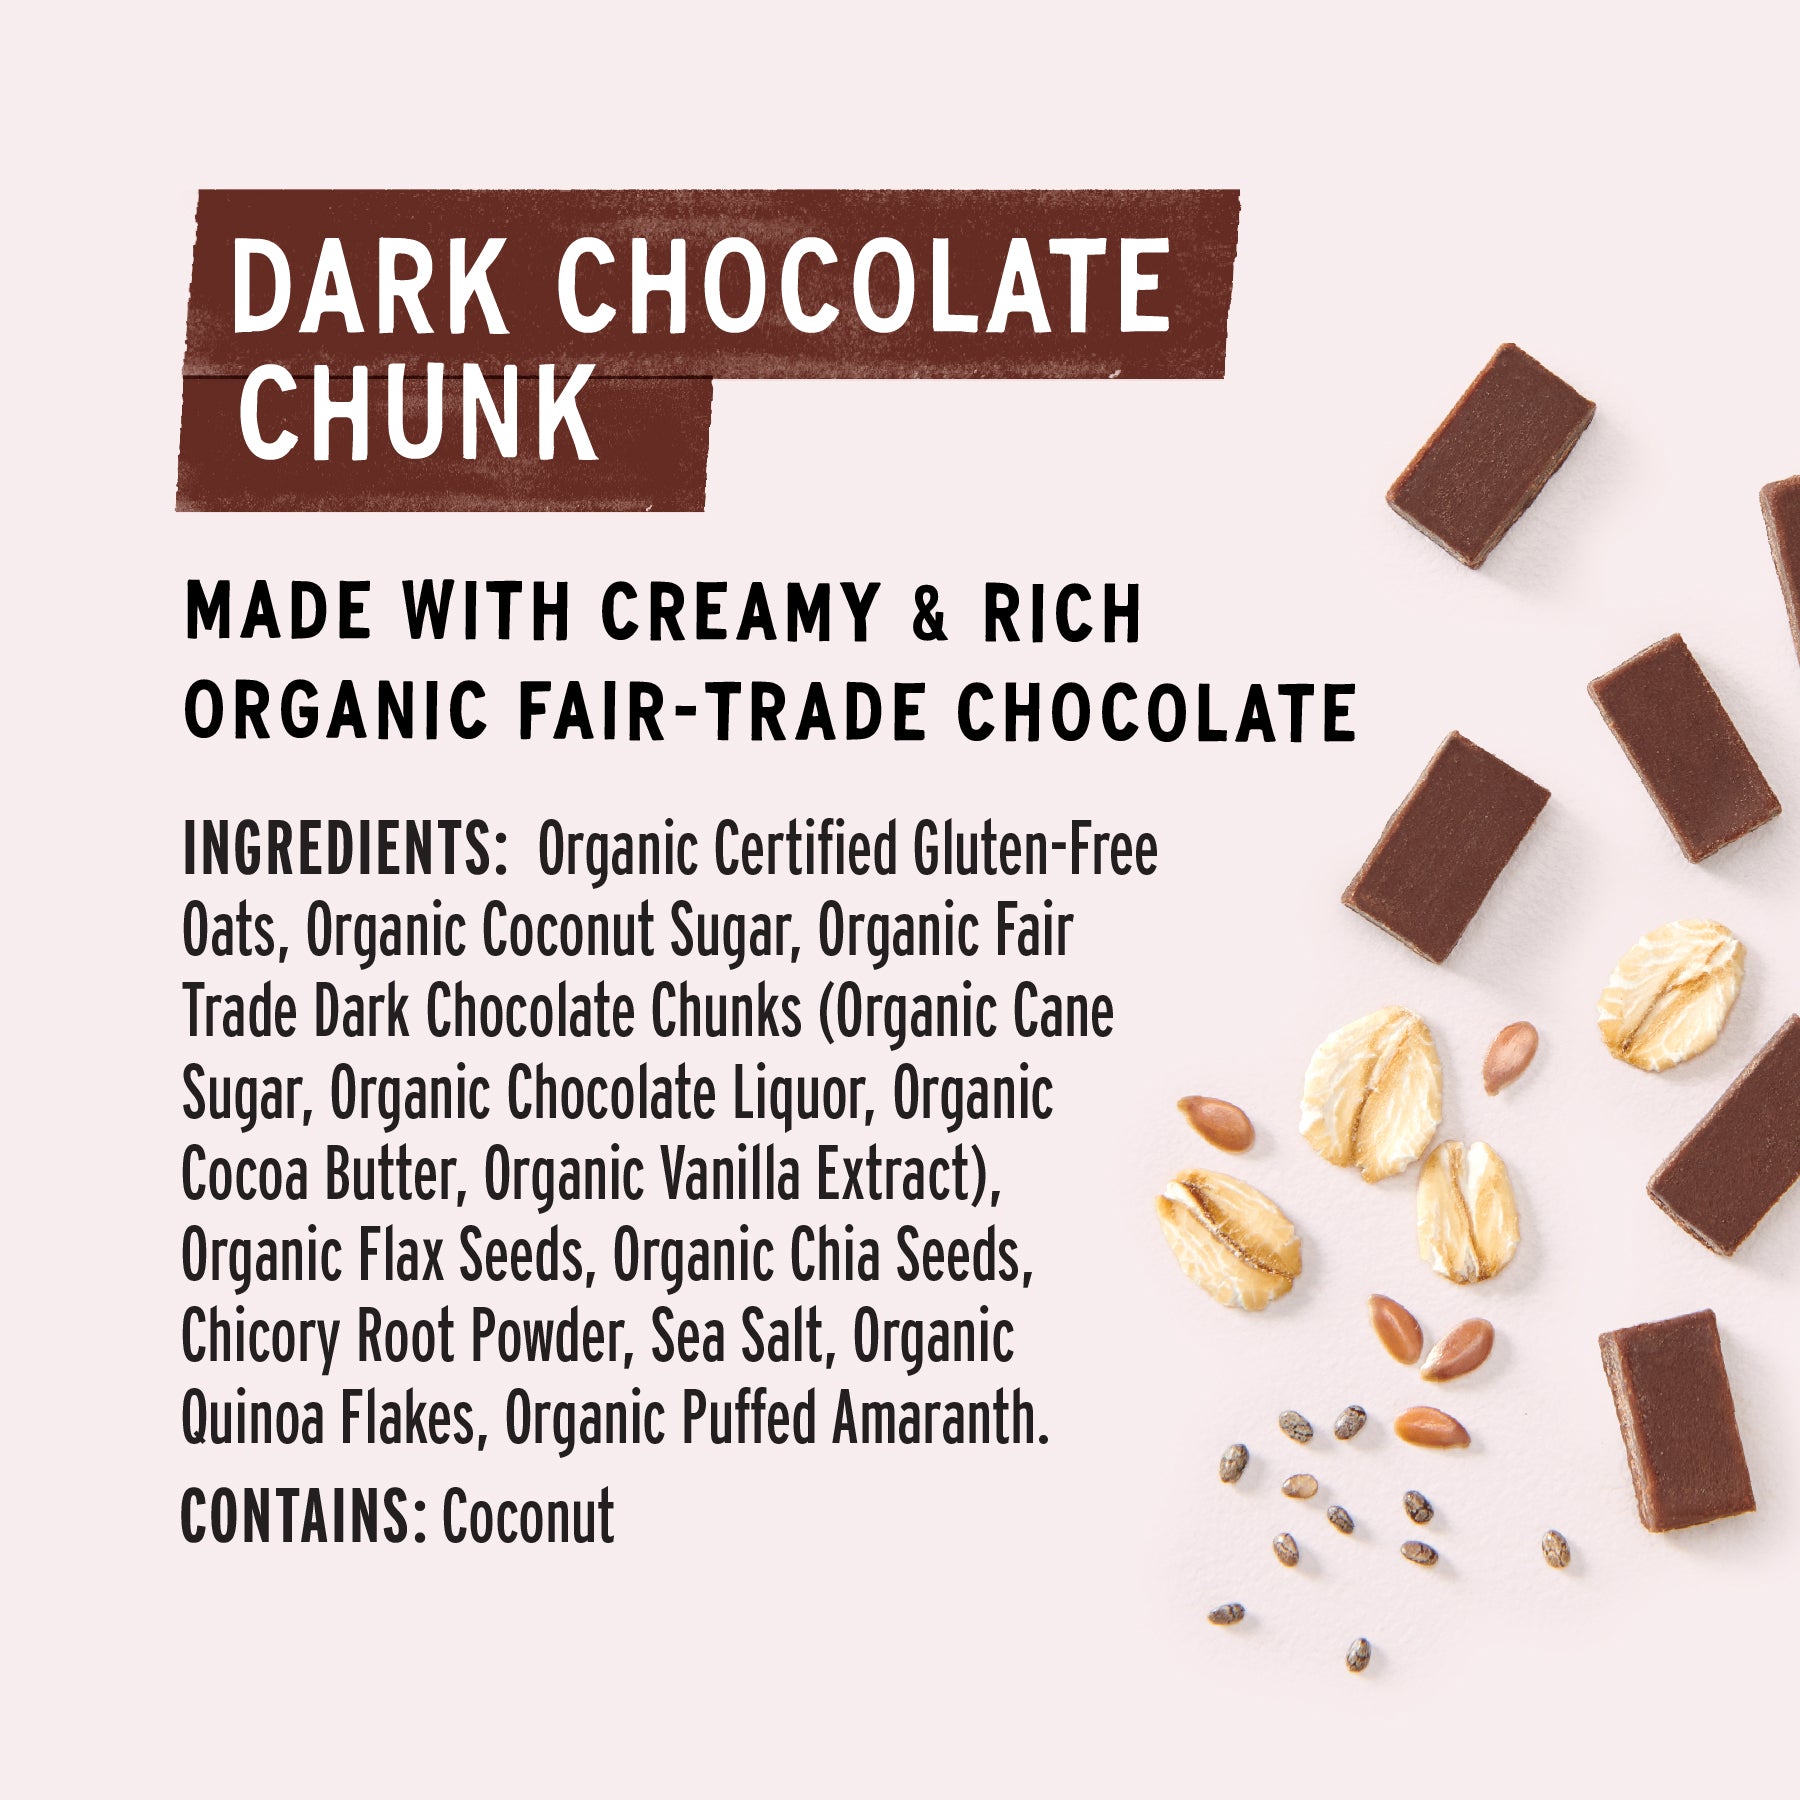 Dark Chocolate Chunk Superfood Oat Cup with Prebiotic Fiber